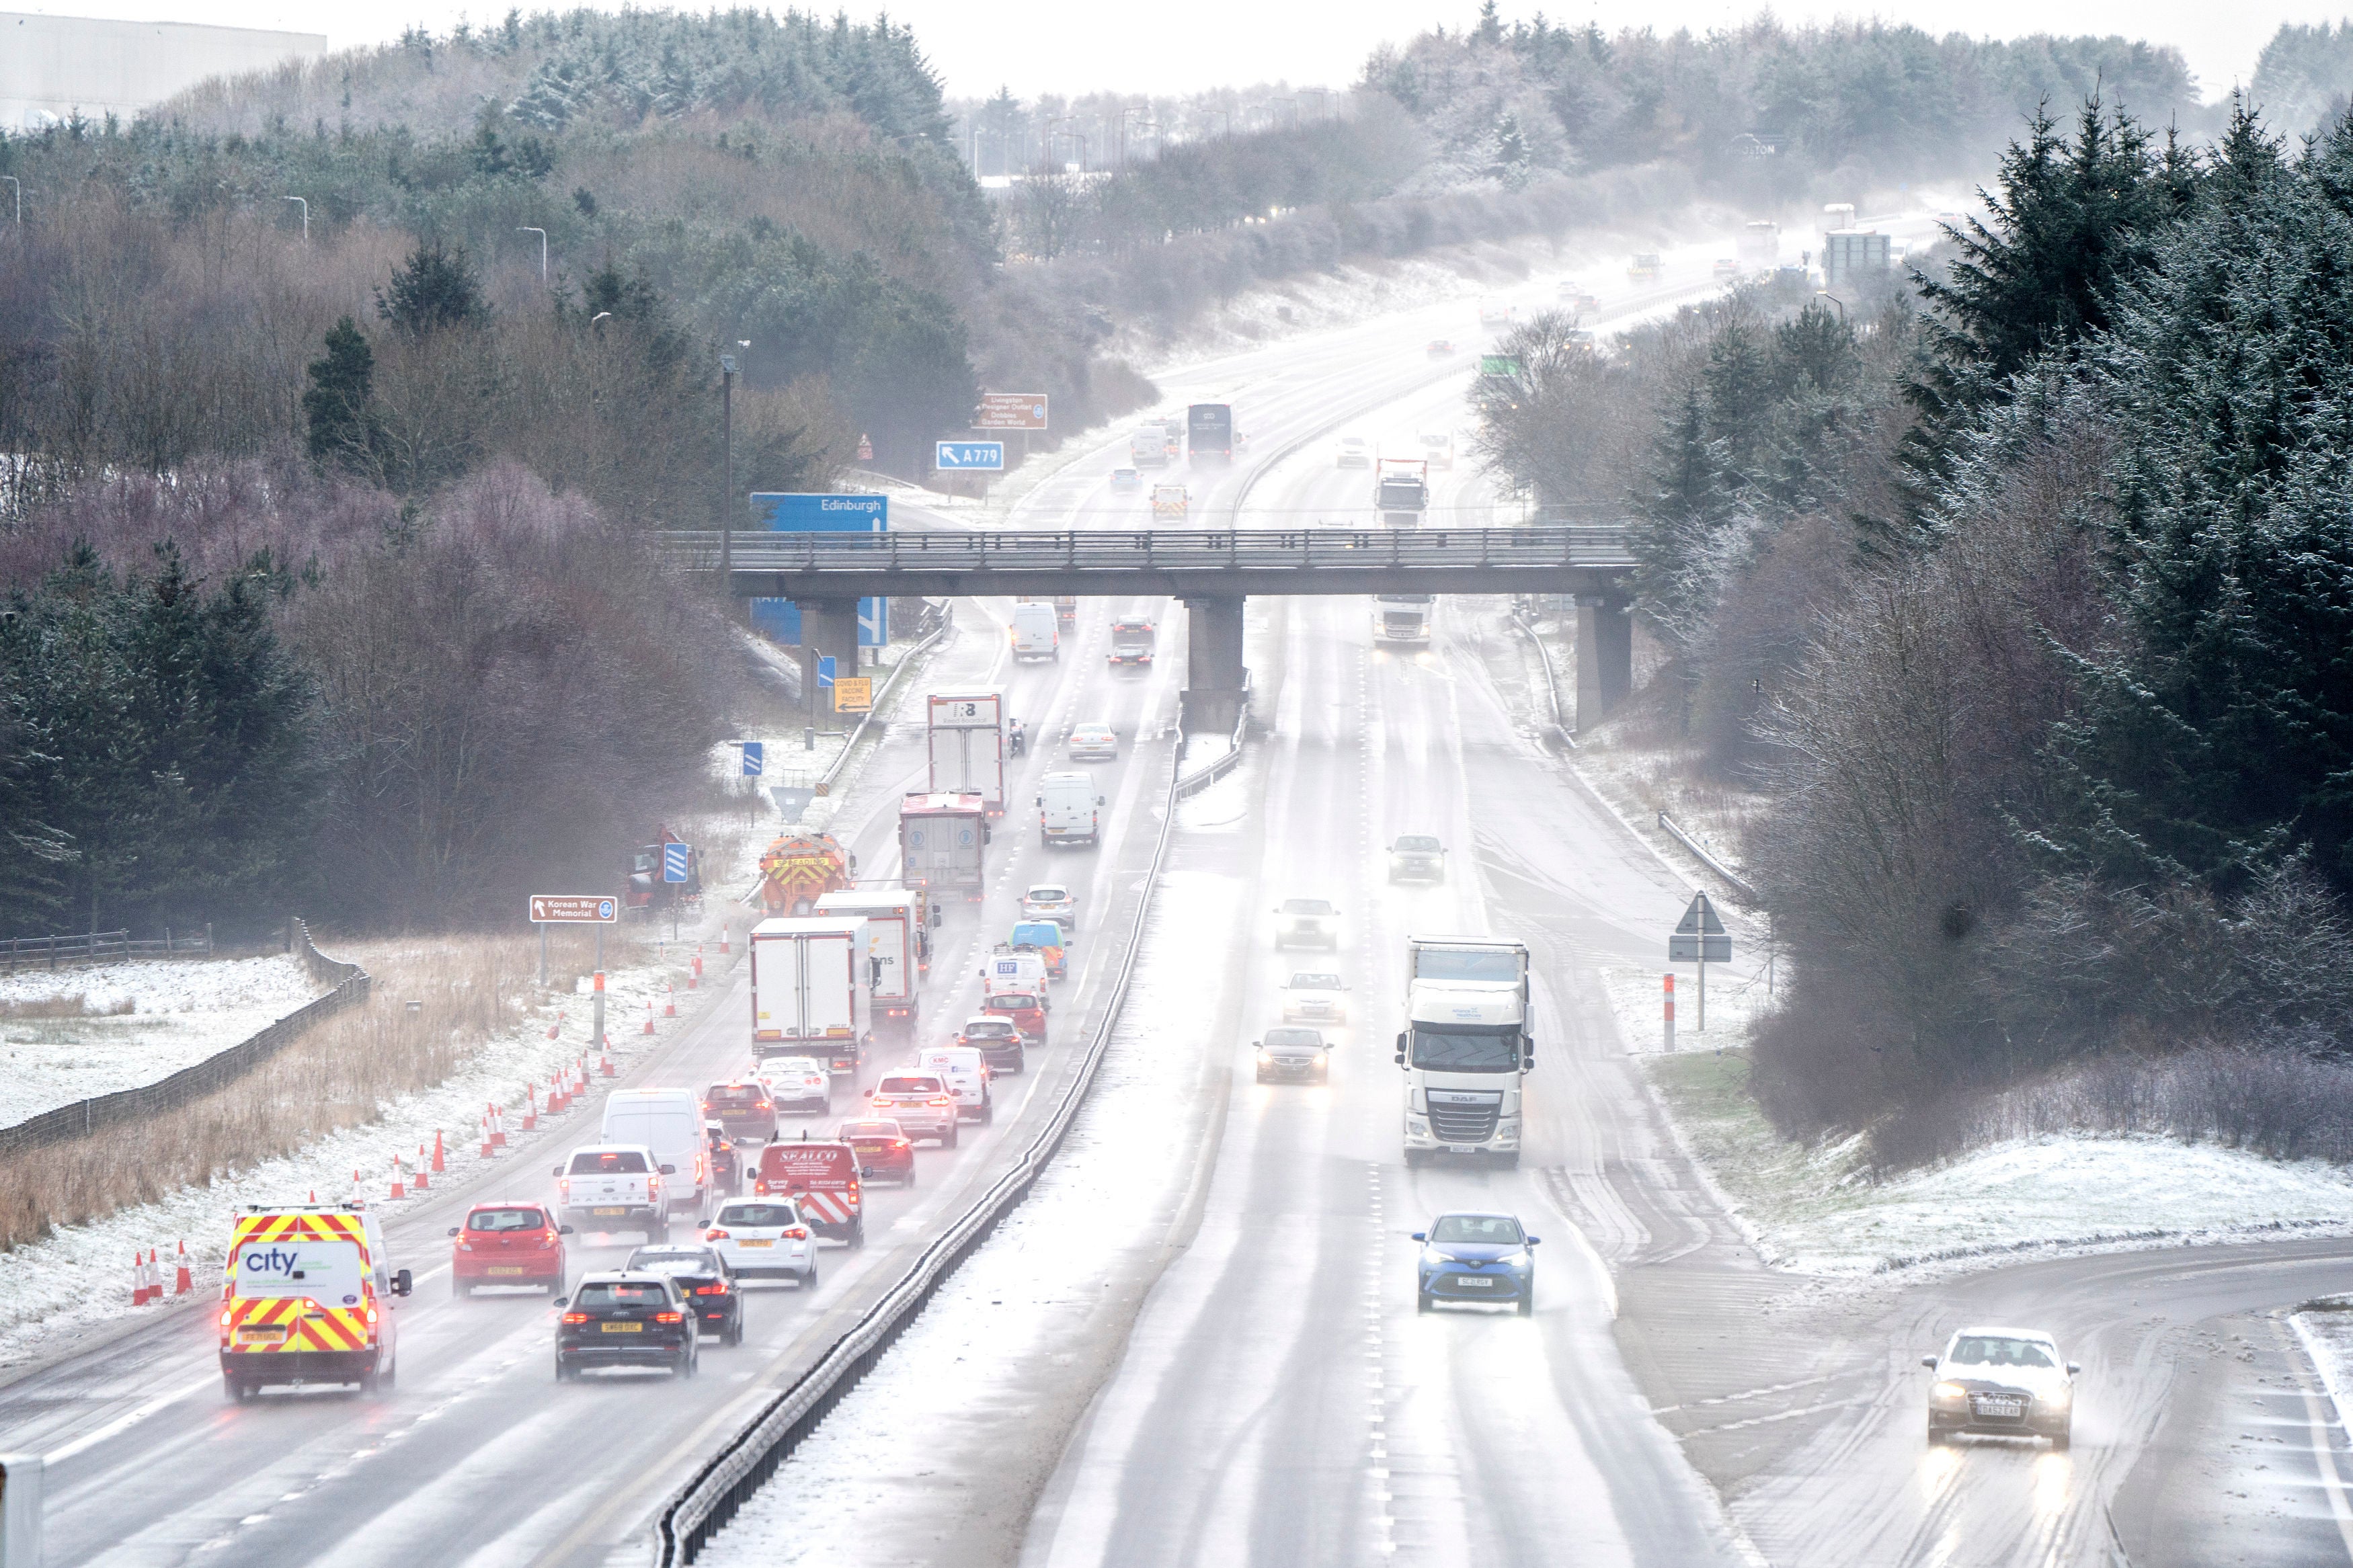 Motorists drive through the sleet and snow along the M8 motorway near Bathgate in West Lothian